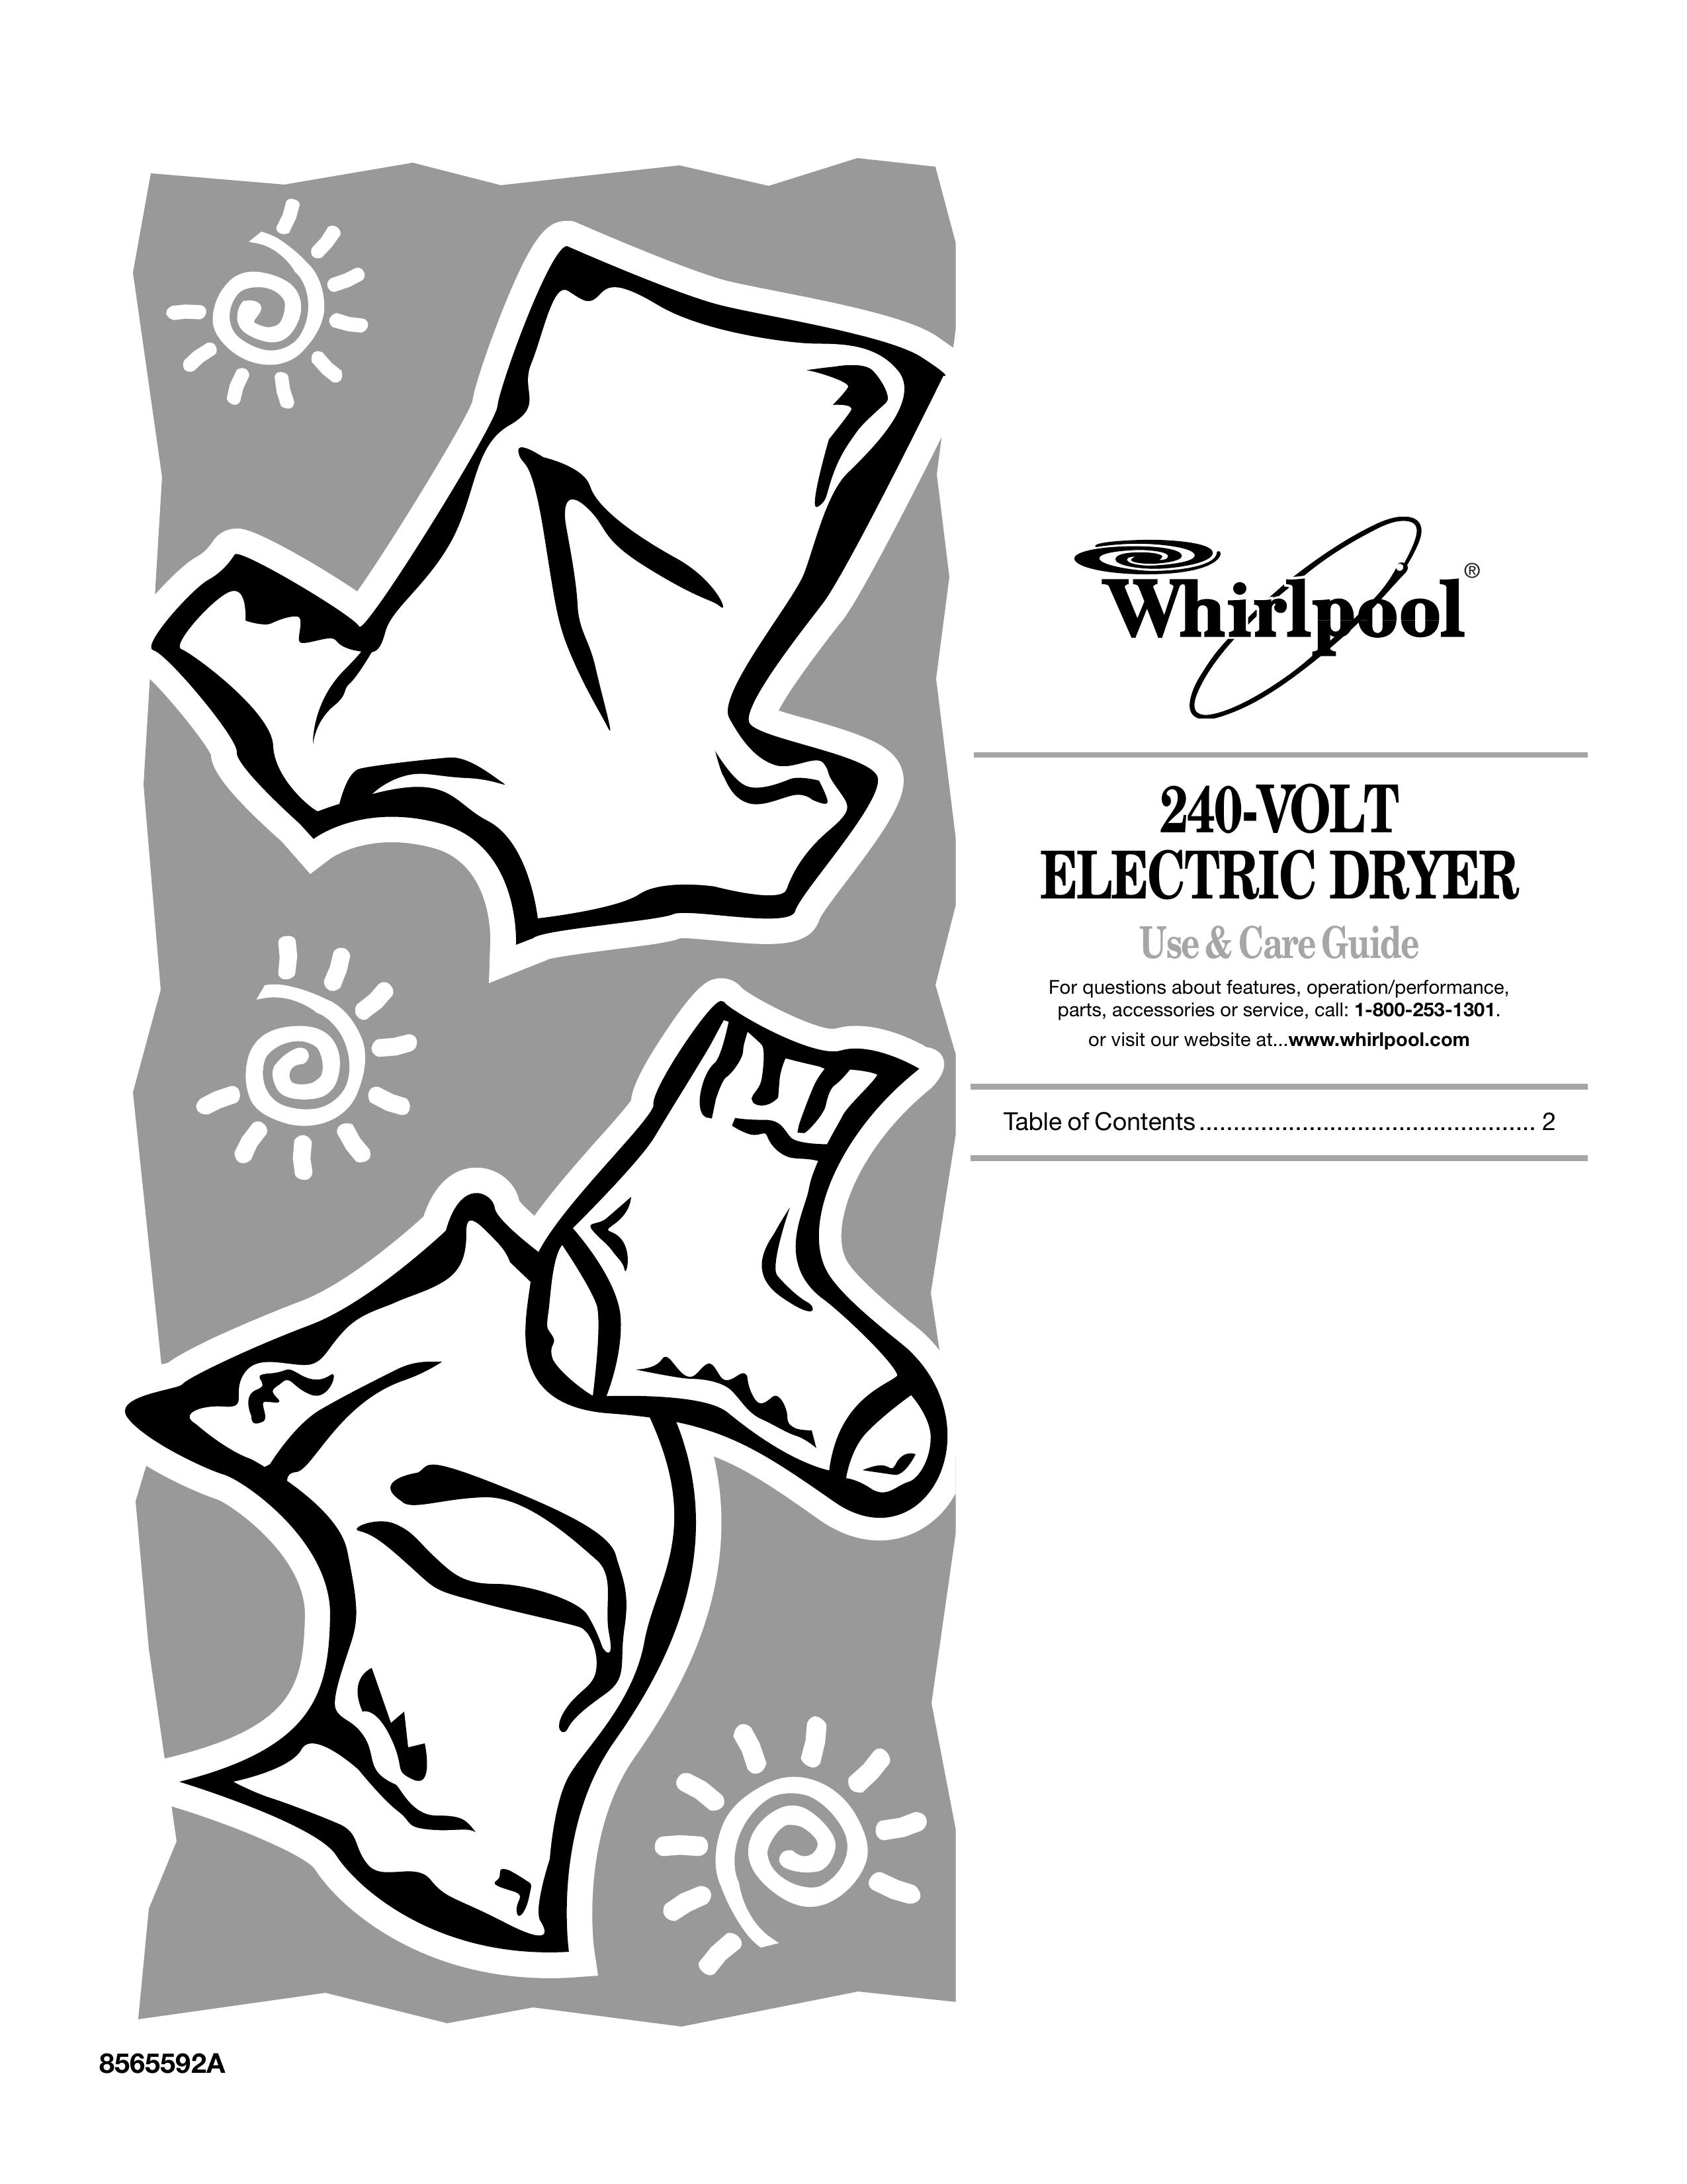 Whirlpool 240-VOLT ELECTRIC DRYER Clothes Dryer User Manual